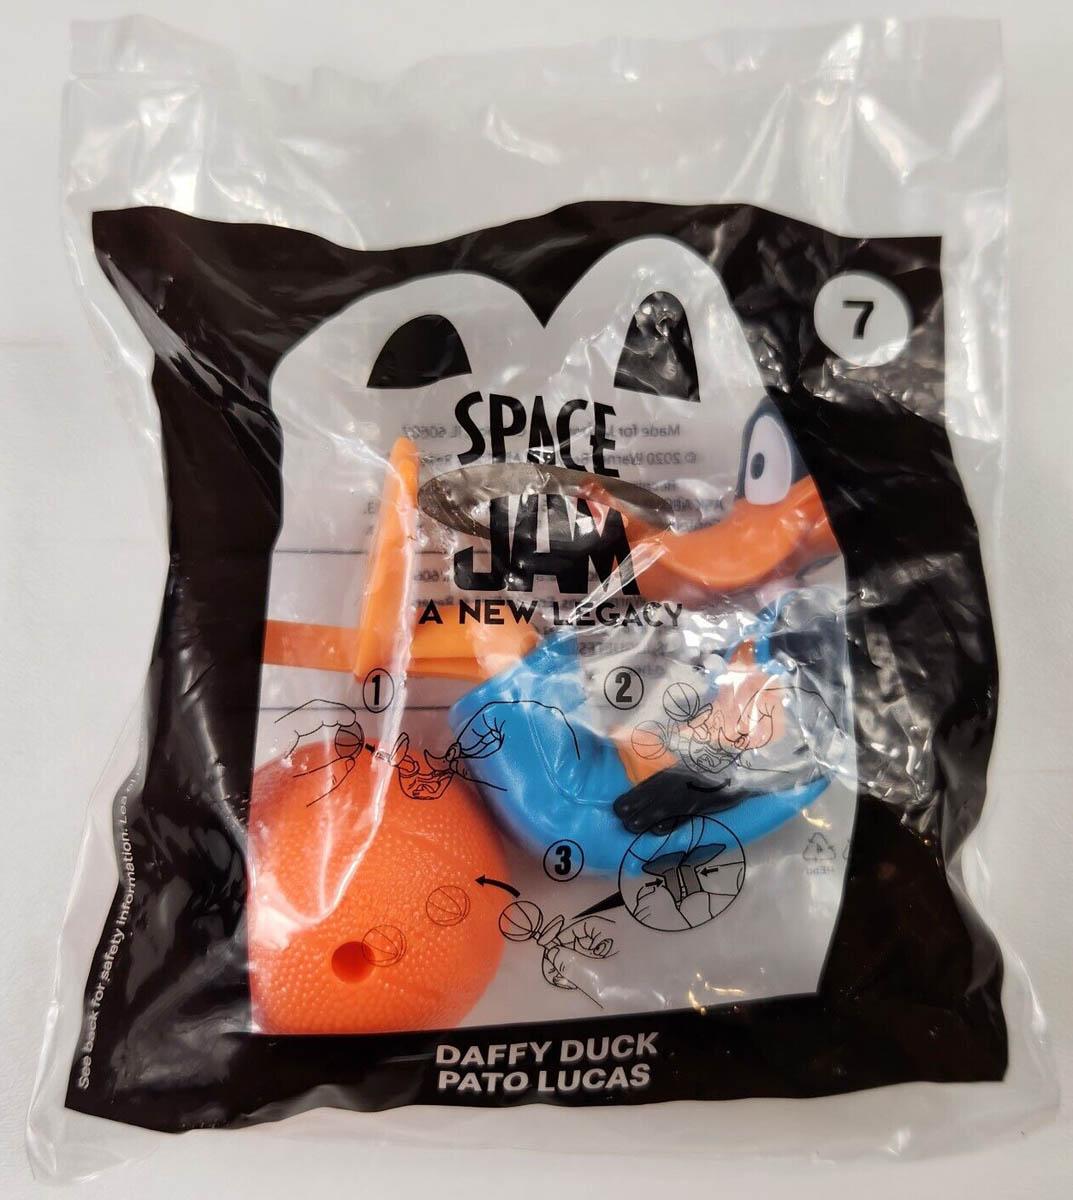 DAFFY DUCK – Space Jam Toy 7, McDonald’s Happy Meal, 2021